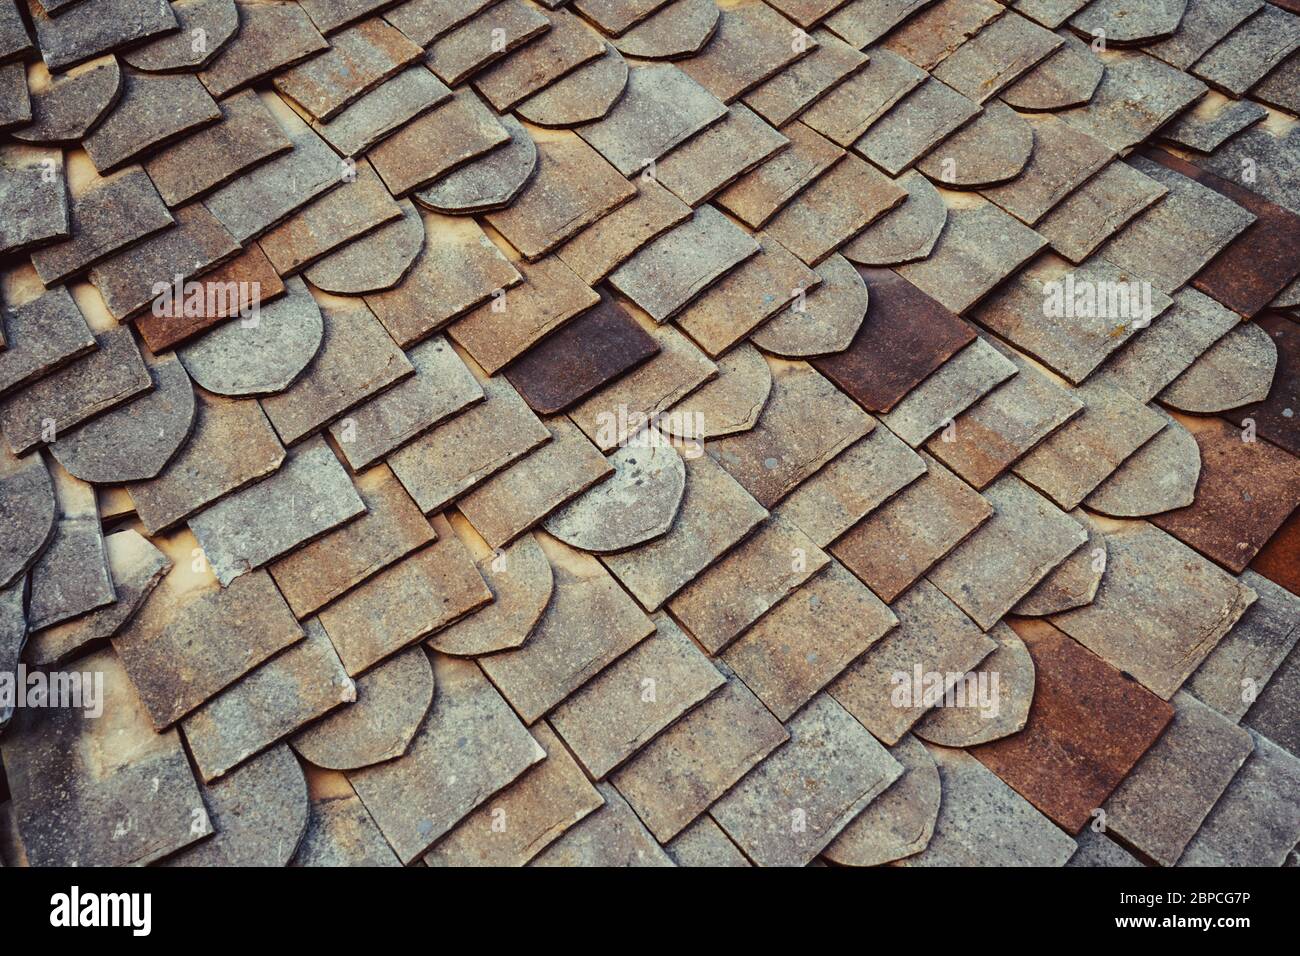 Close up roof tiles texture for background. Old Fashioned style Roof Tiles  rows. English vintage ceramic tiles of various shapes Stock Photo - Alamy